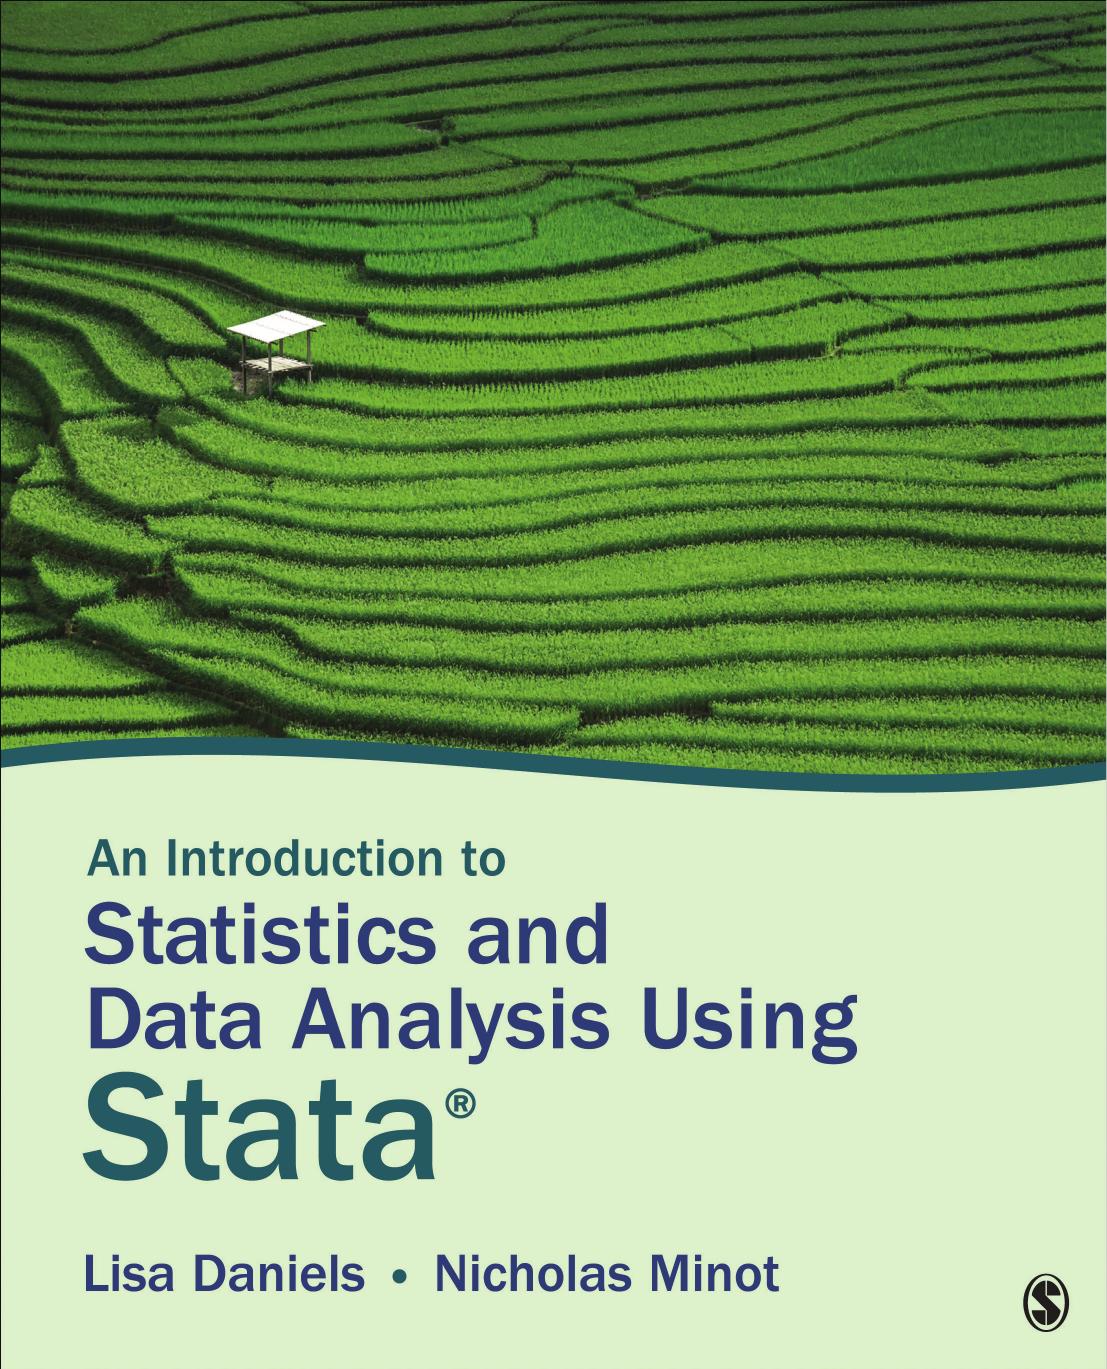 Introduction to Statistics and Data Analysis Using Stata(R)